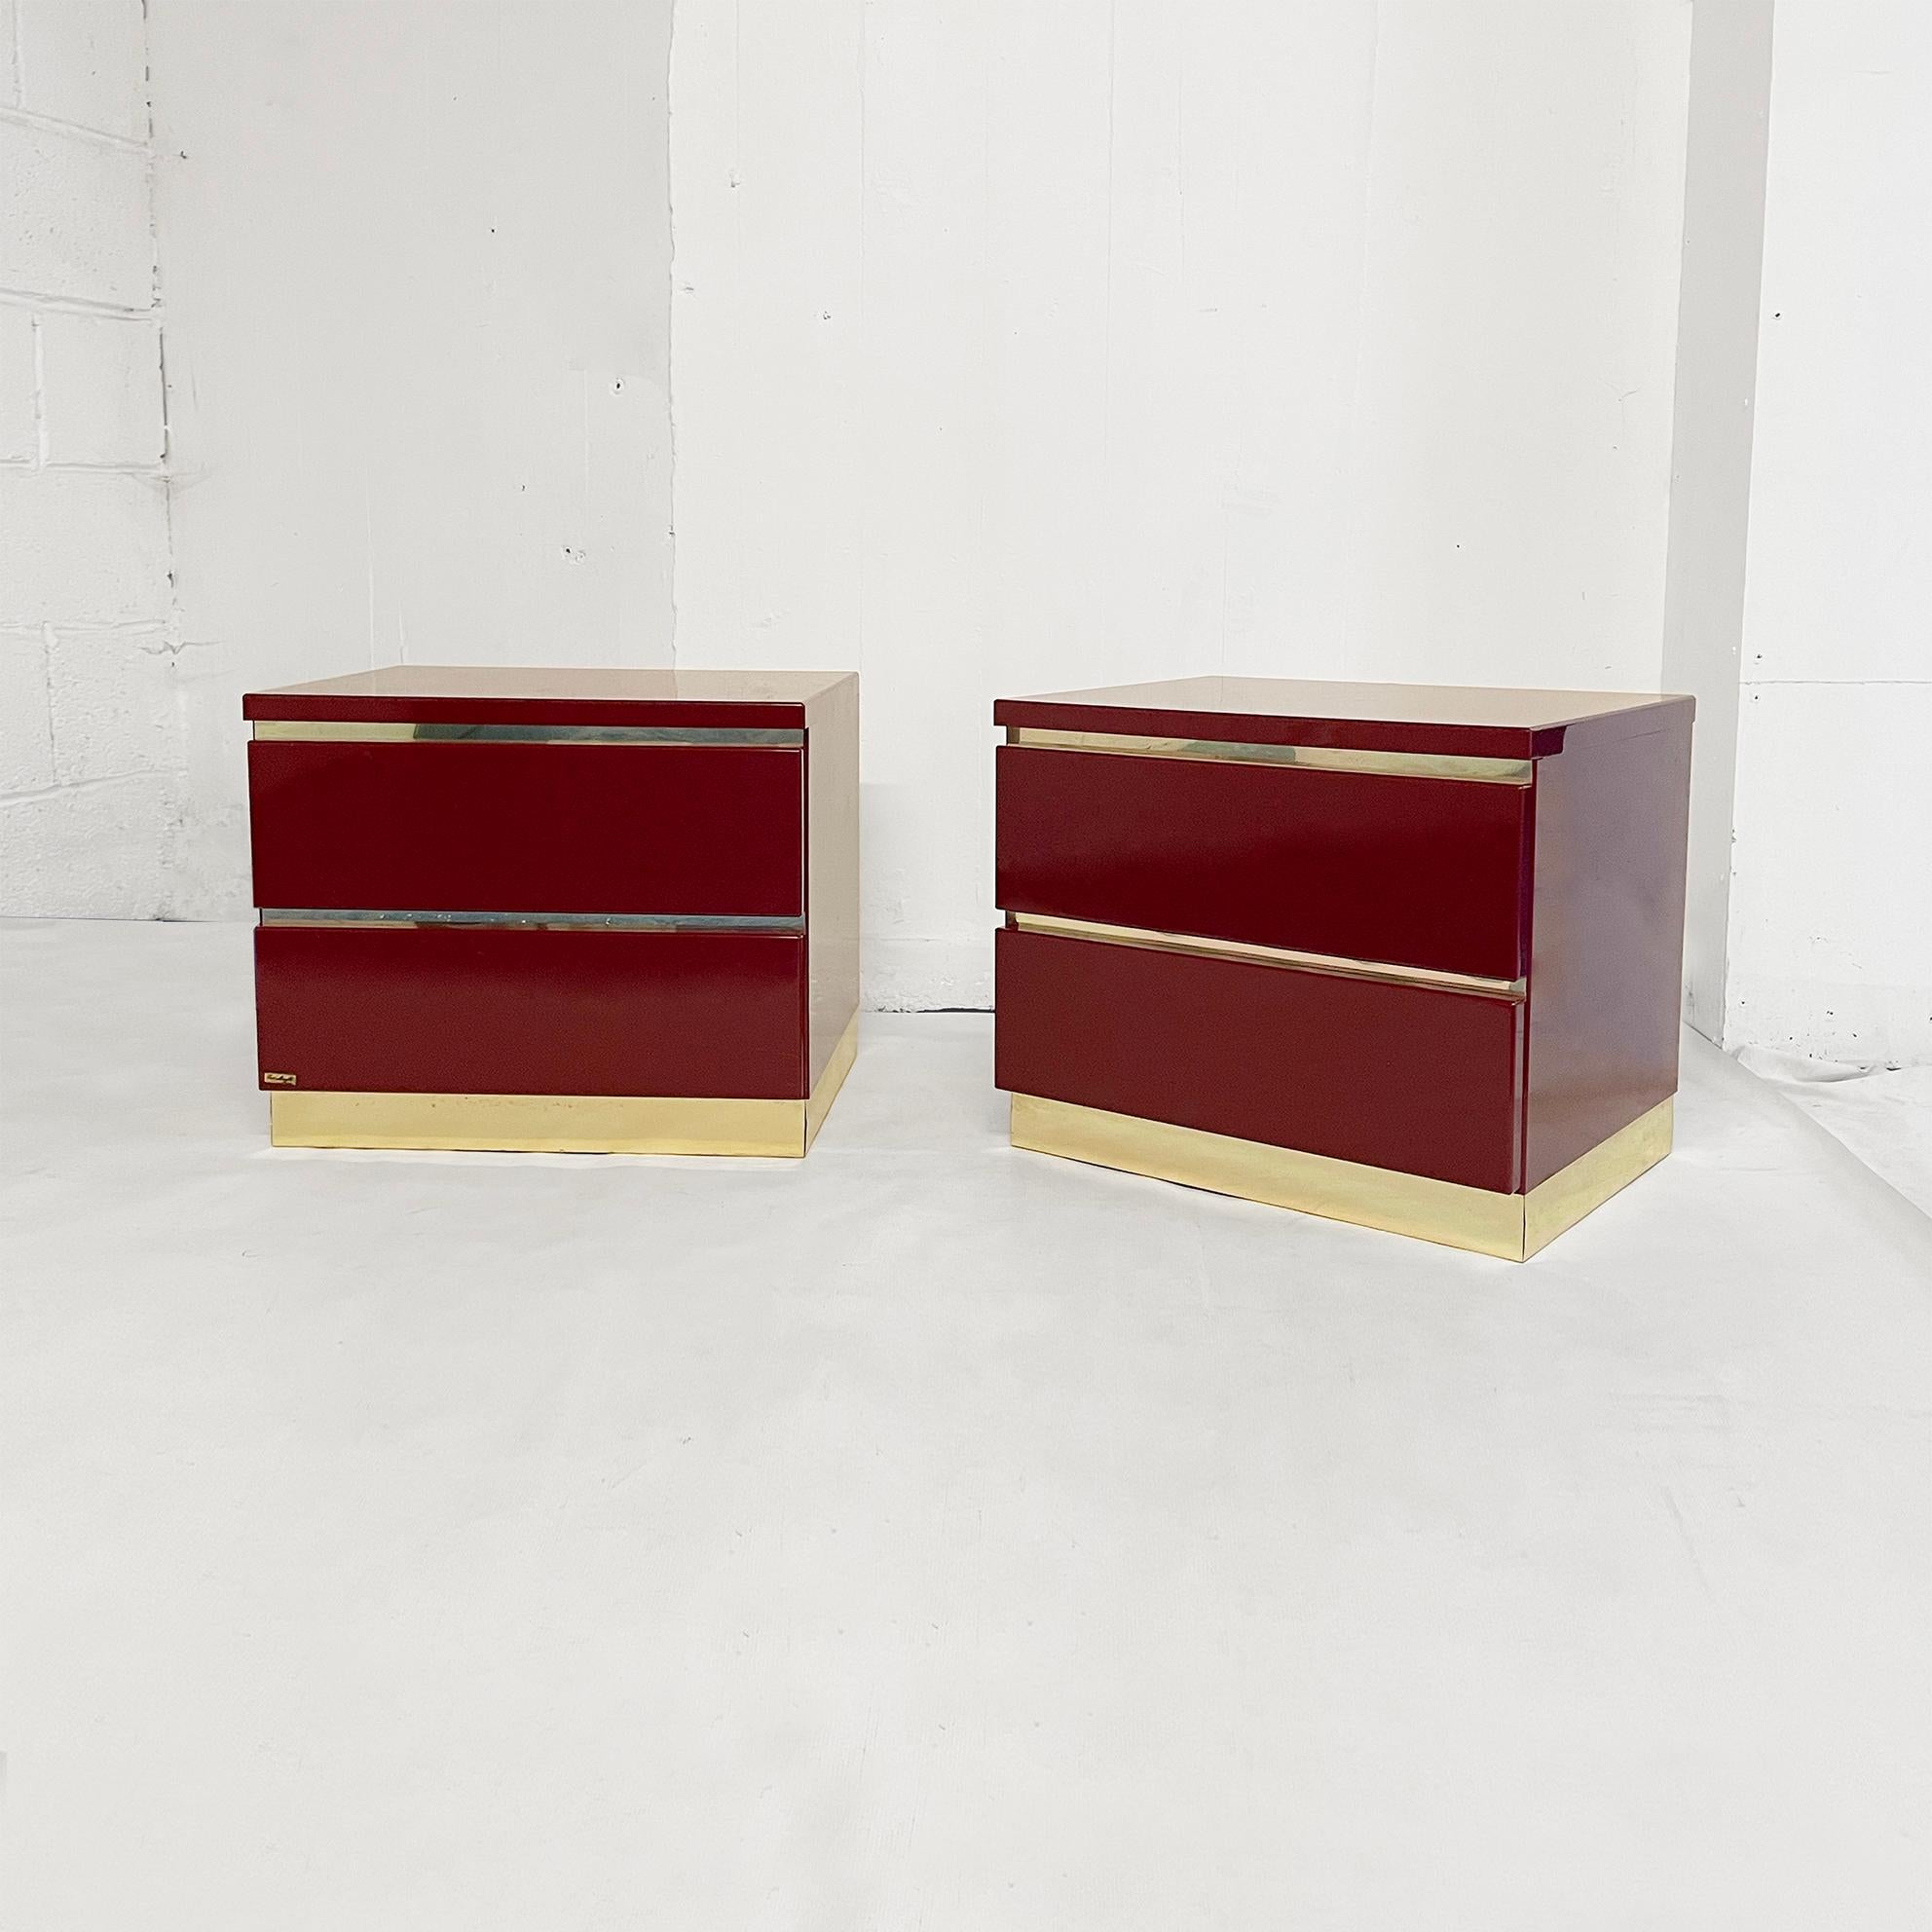 An exquisite bedside tables set by the French 1970s designer Eric Maville in deep burgundy and brass. This signed French import consists of a pair of bedside tables/drawers( a double bed in burgundy acrylic with brass trim also available).

This set